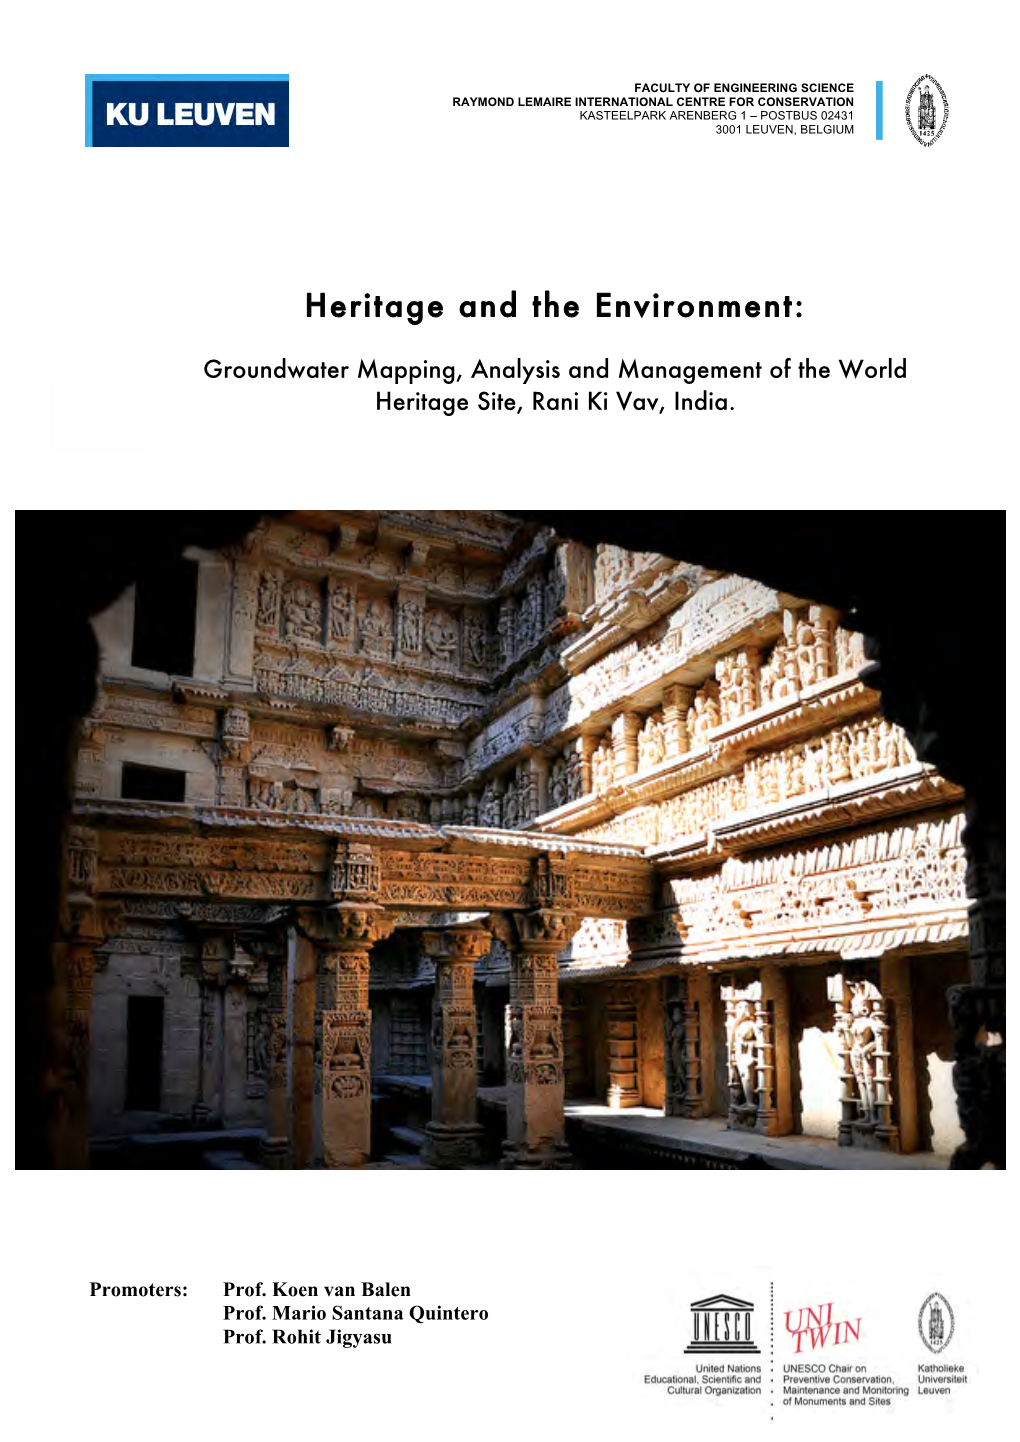 Heritage and the Environment